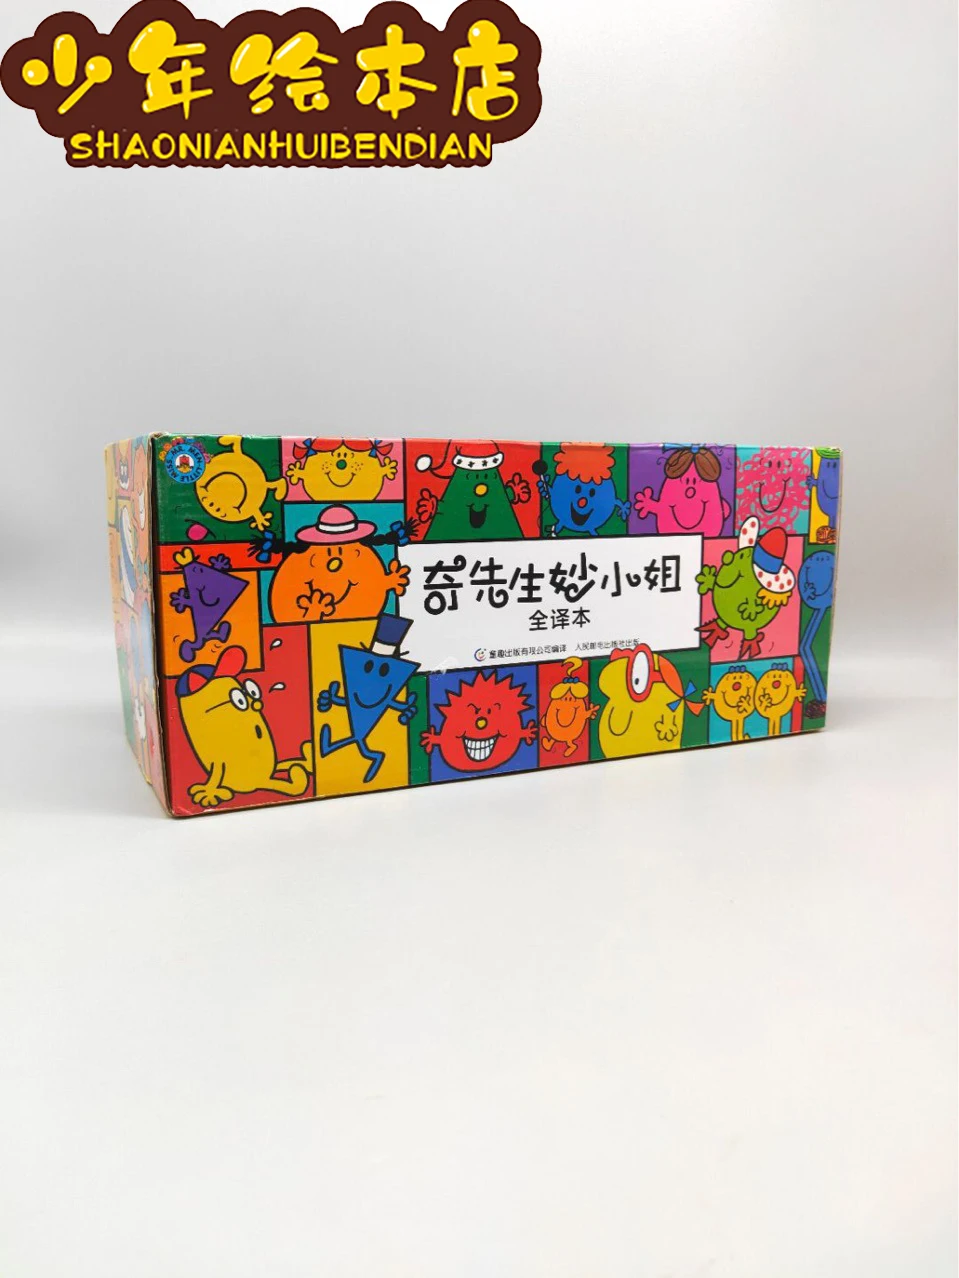 Teacher Qi, Teacher Miao, 90 volumes of 3-6 year old children's emotional management enlightenment education picture book